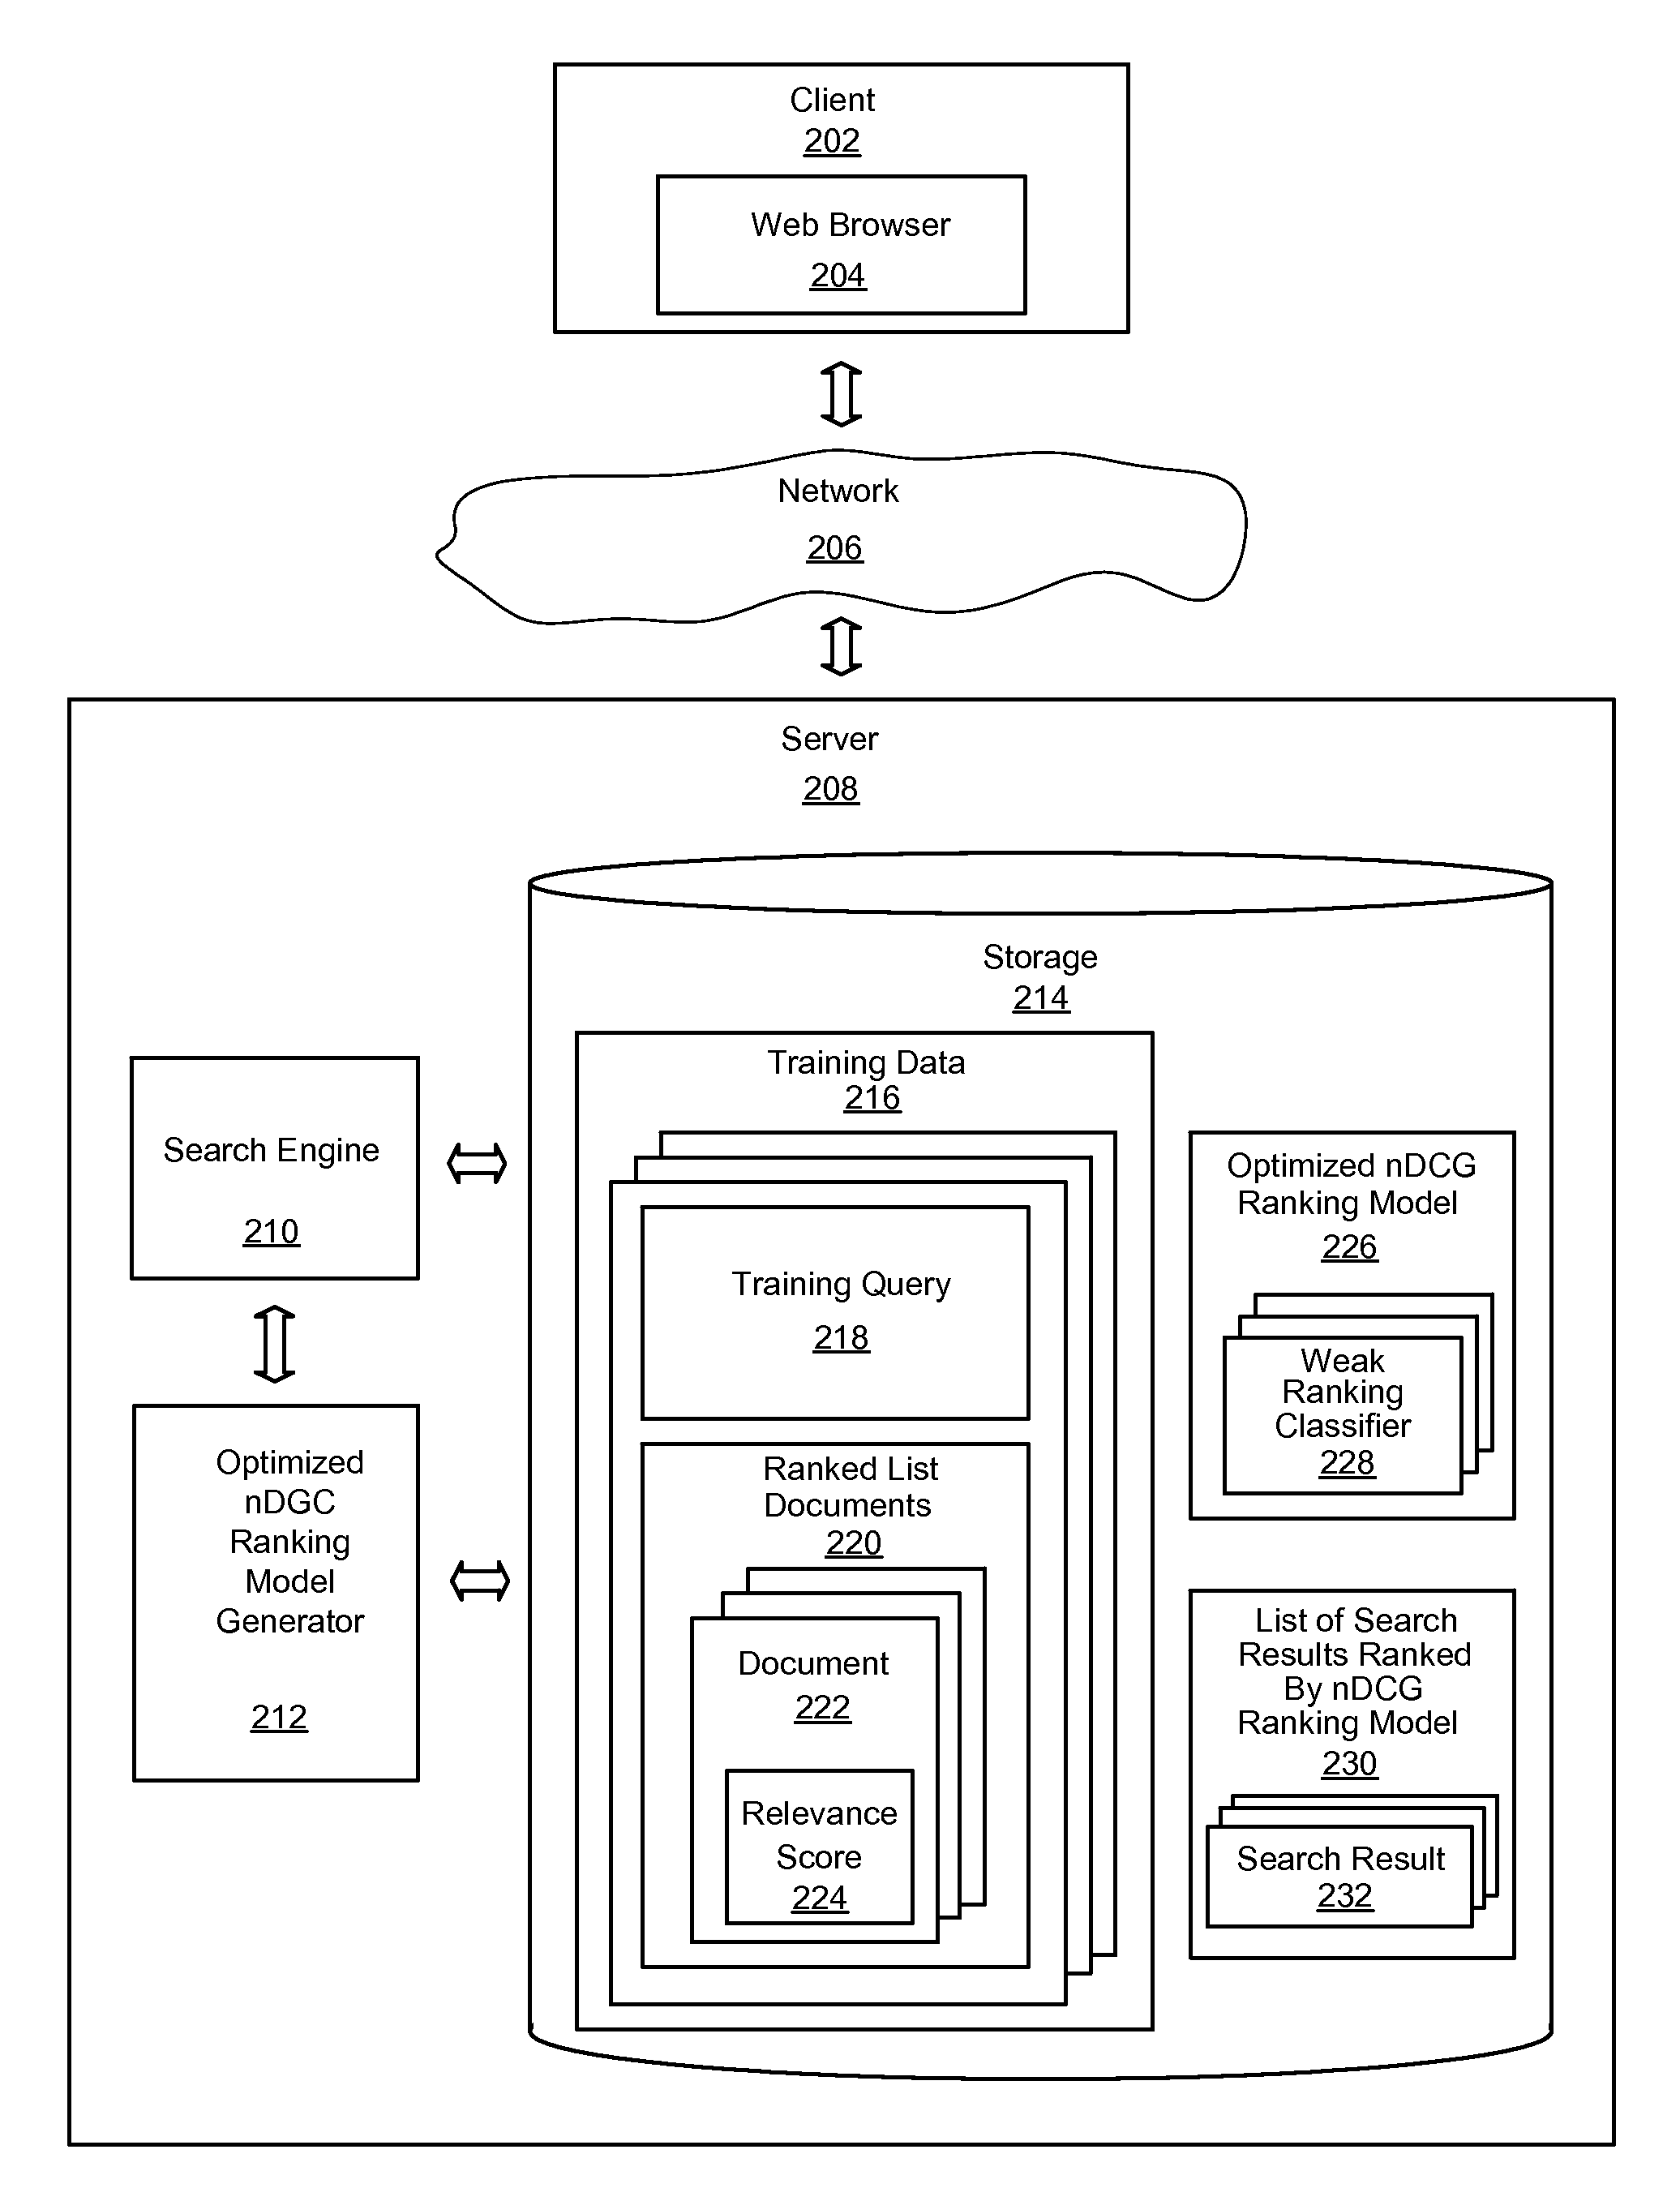 System and method for learning a ranking model that optimizes a ranking evaluation metric for ranking search results of a search query